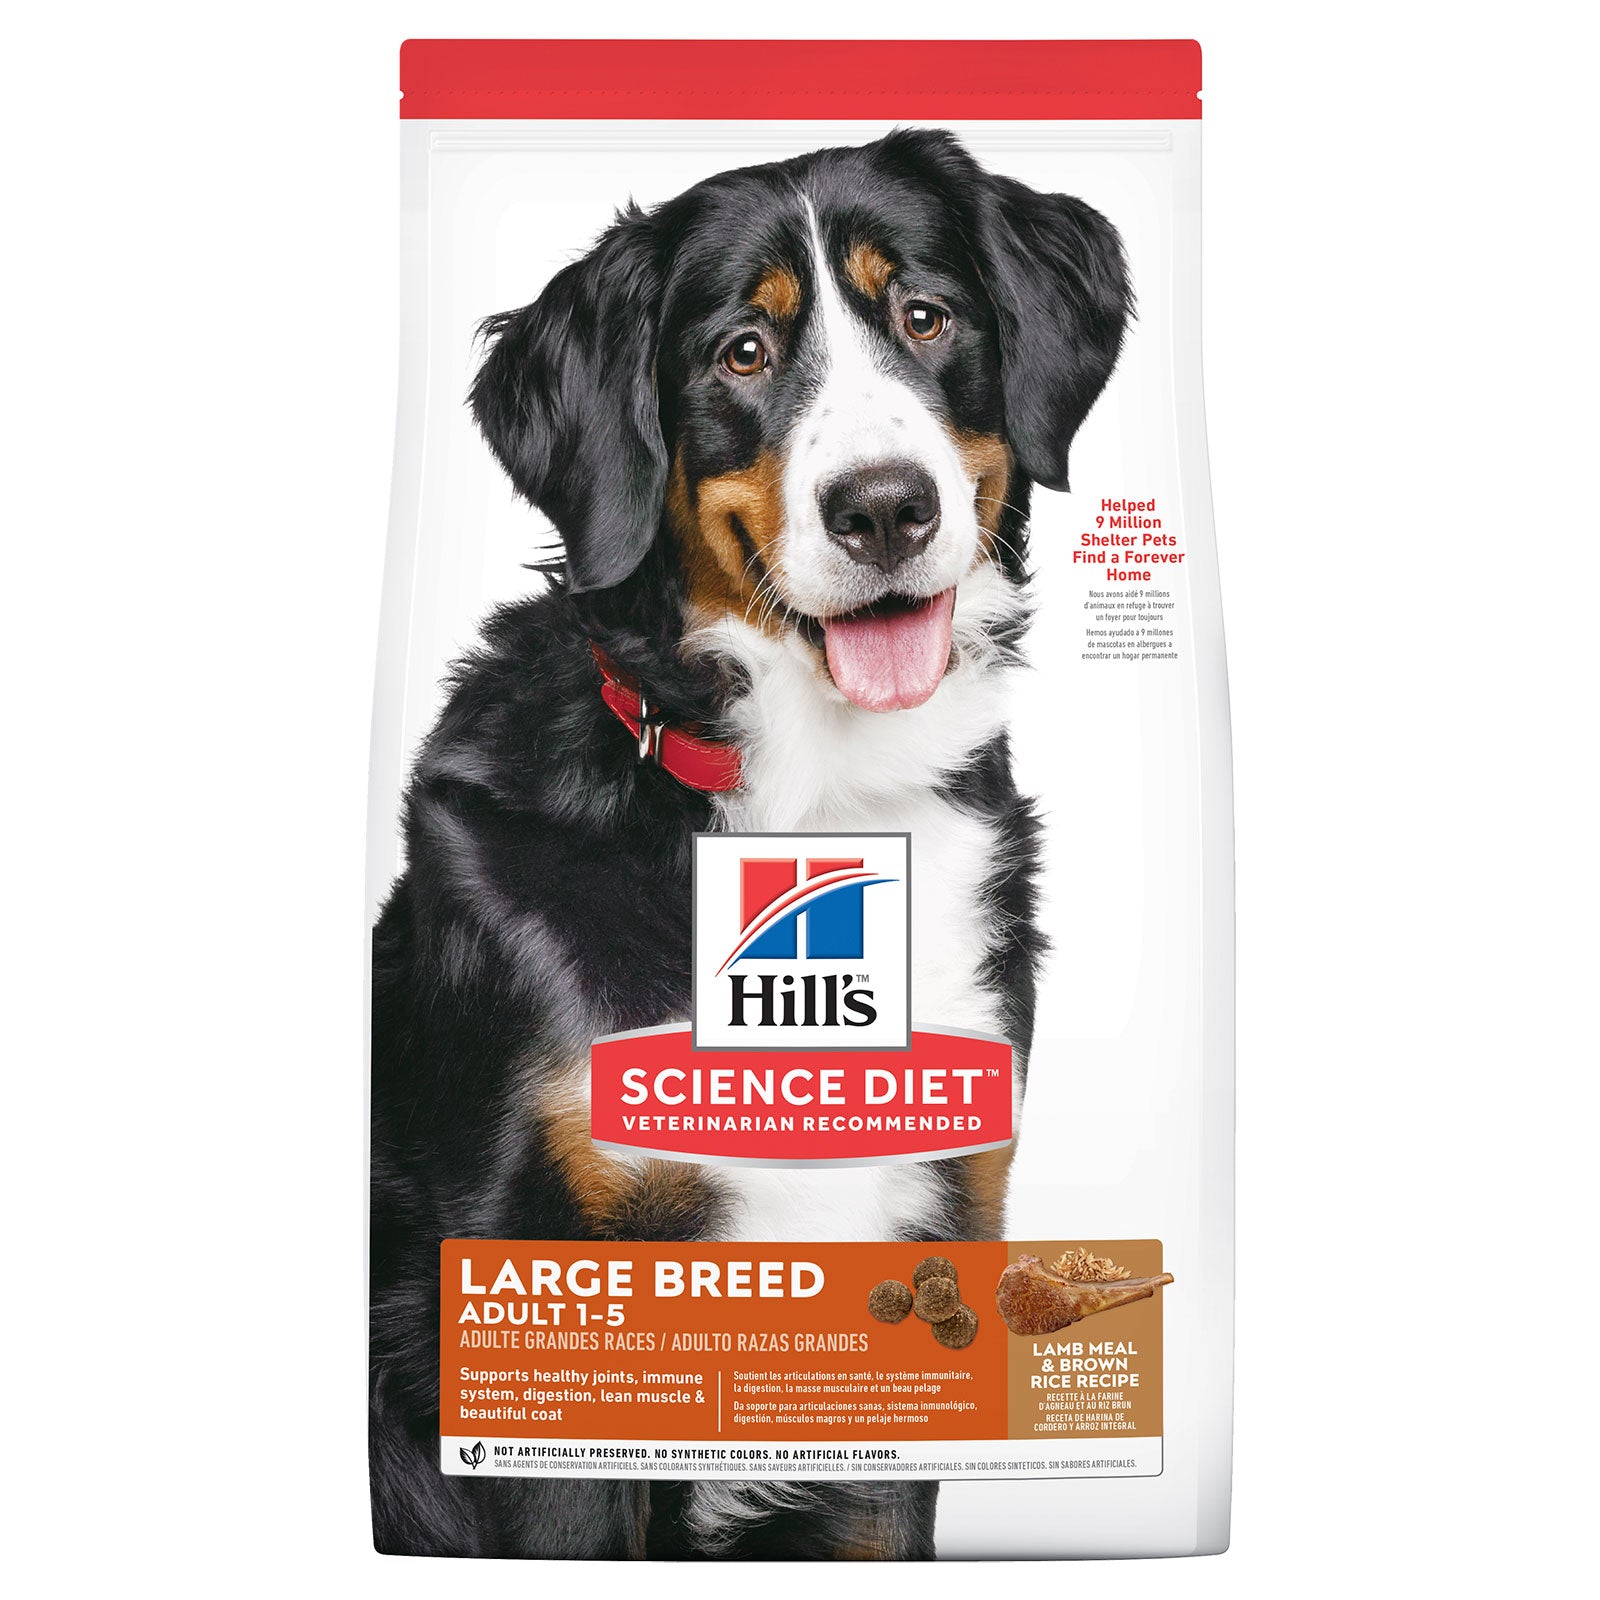 Hill's Science Diet Dog Food Adult Large Breed Lamb Meal & Brown Rice